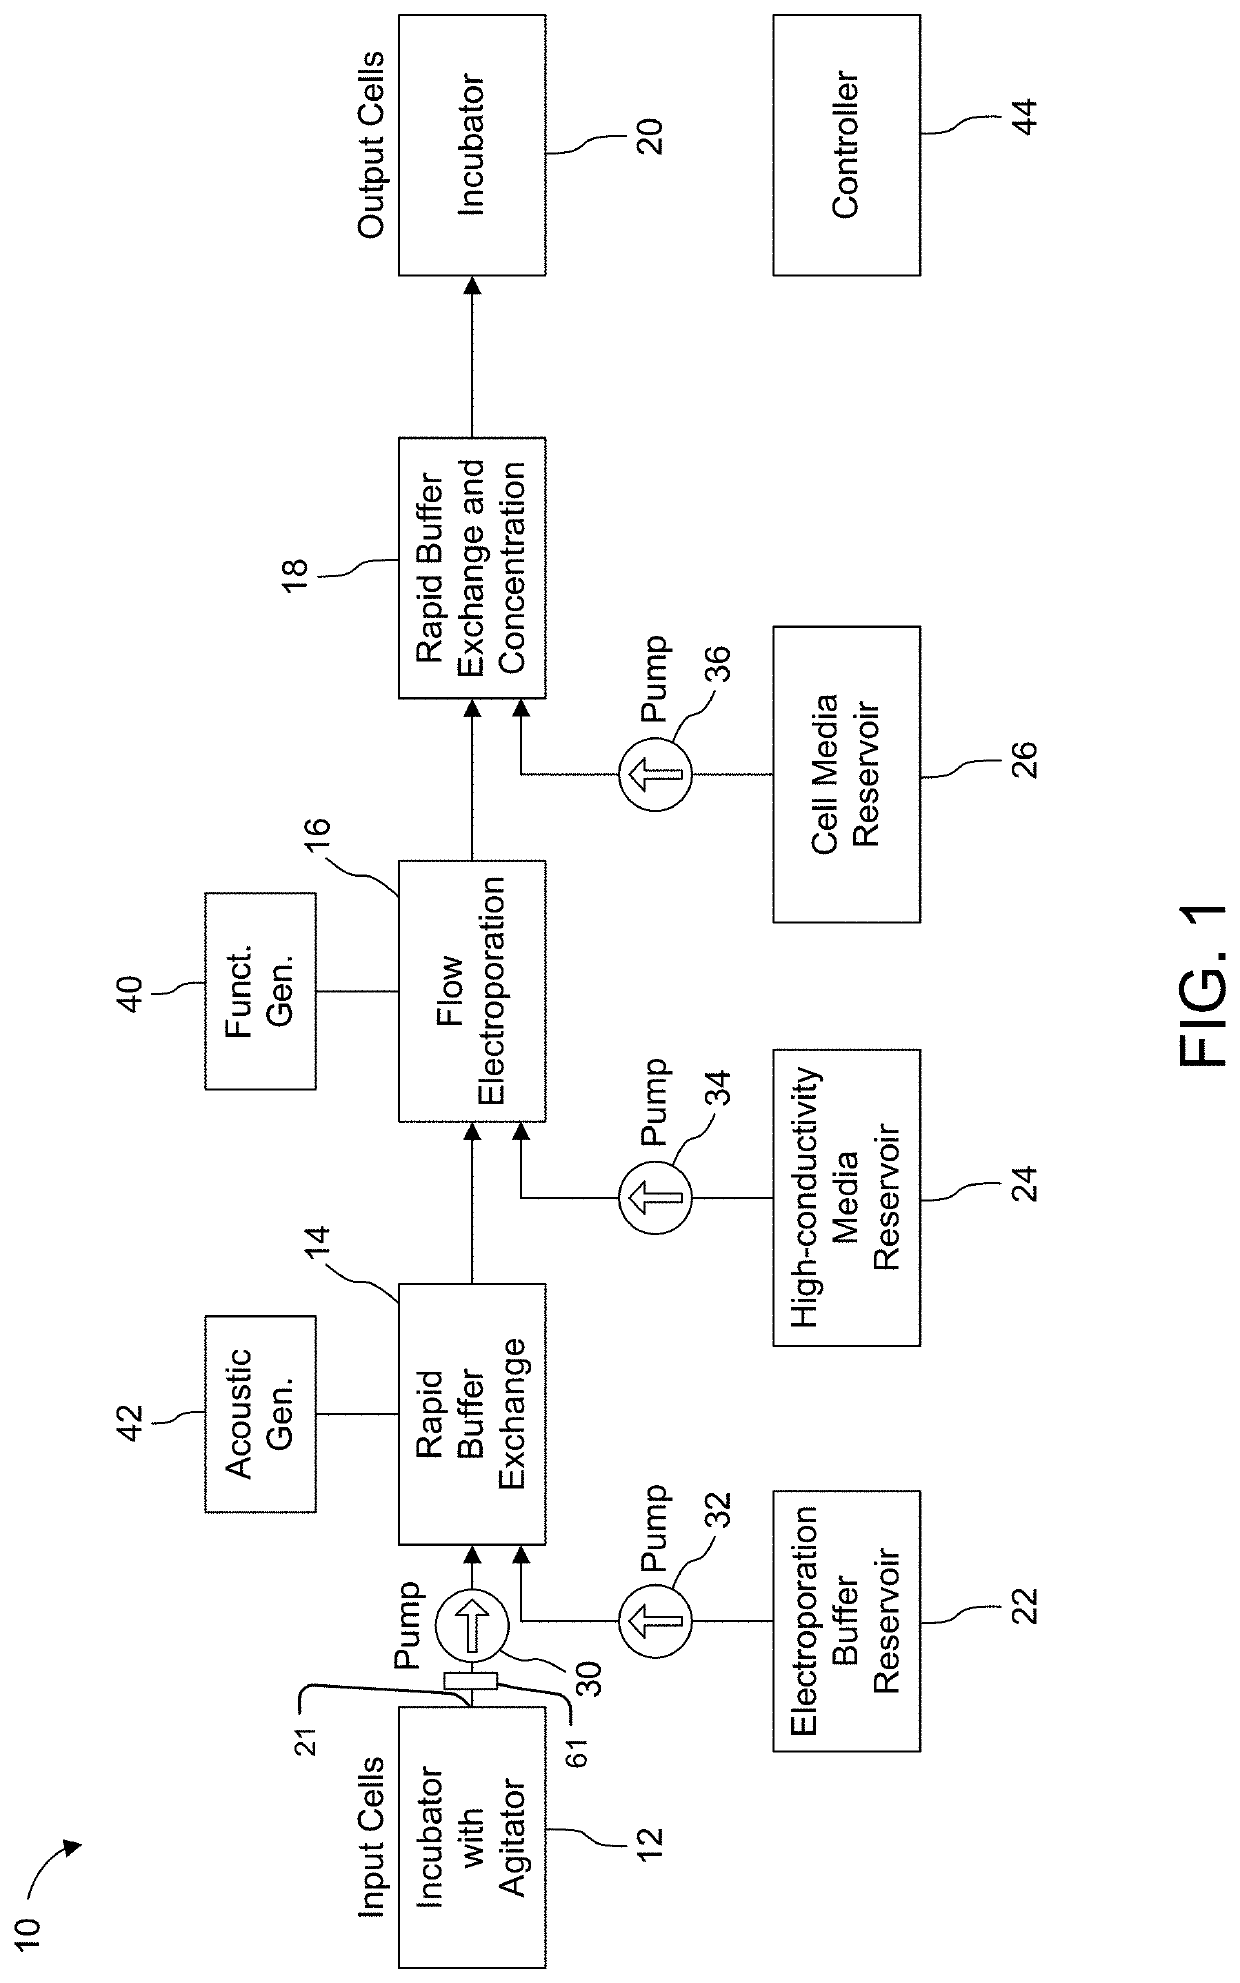 Method and Apparatus for High Throughput High Efficiency Transfection of Cells